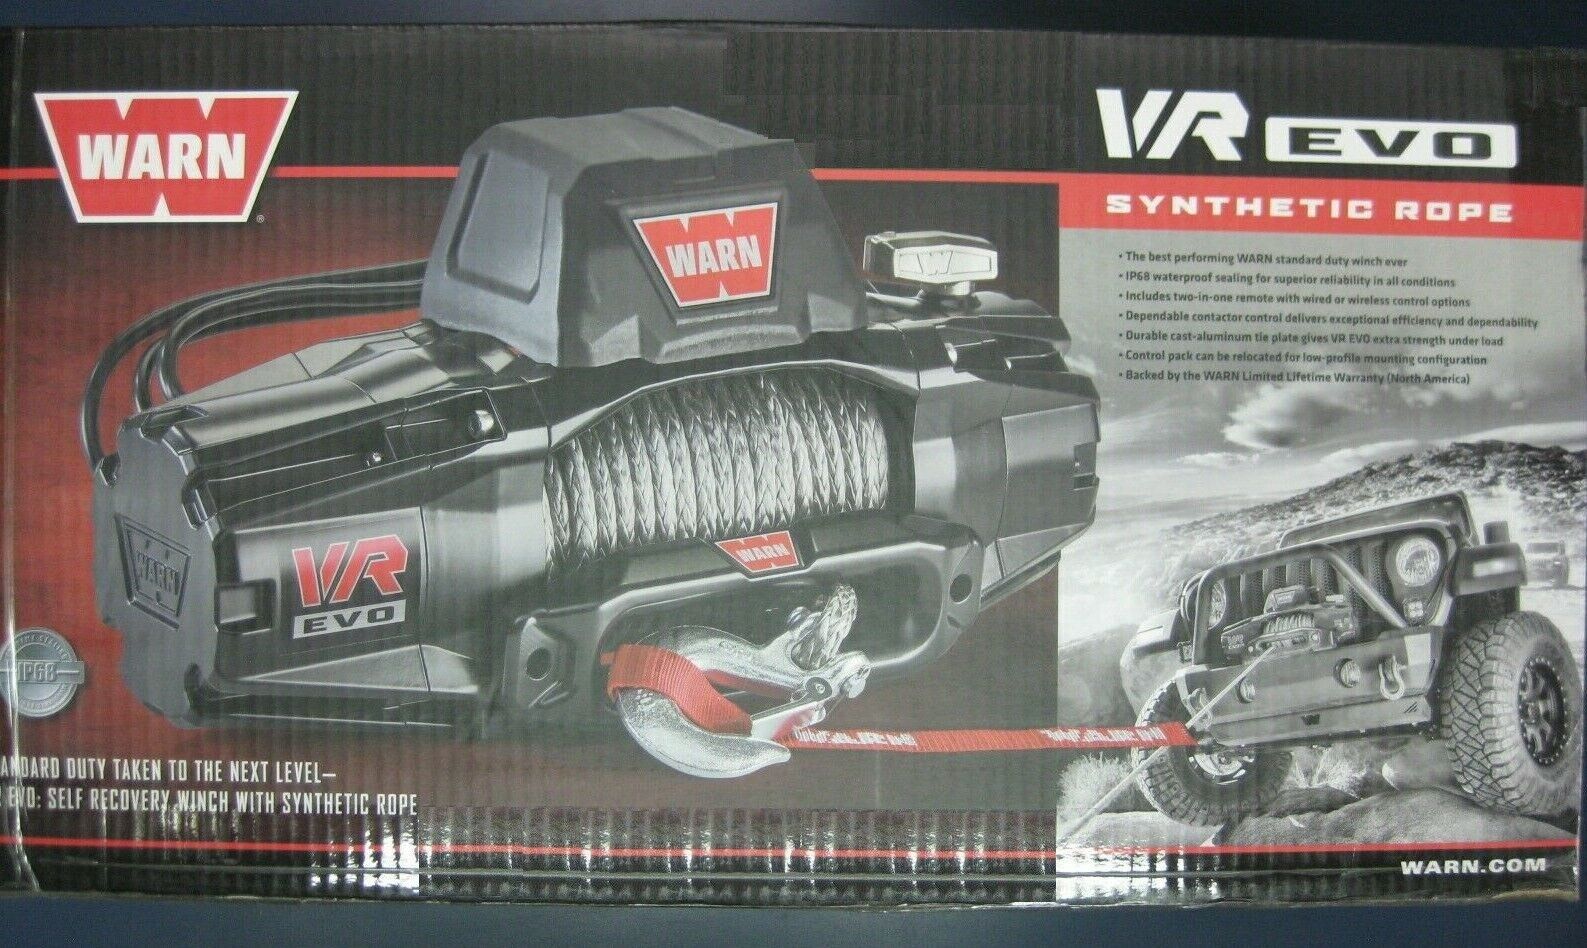 WARN 103251 Winch VR EVO 8-S Electric 12V with Synthetic Rope 8,000 lb Capacity